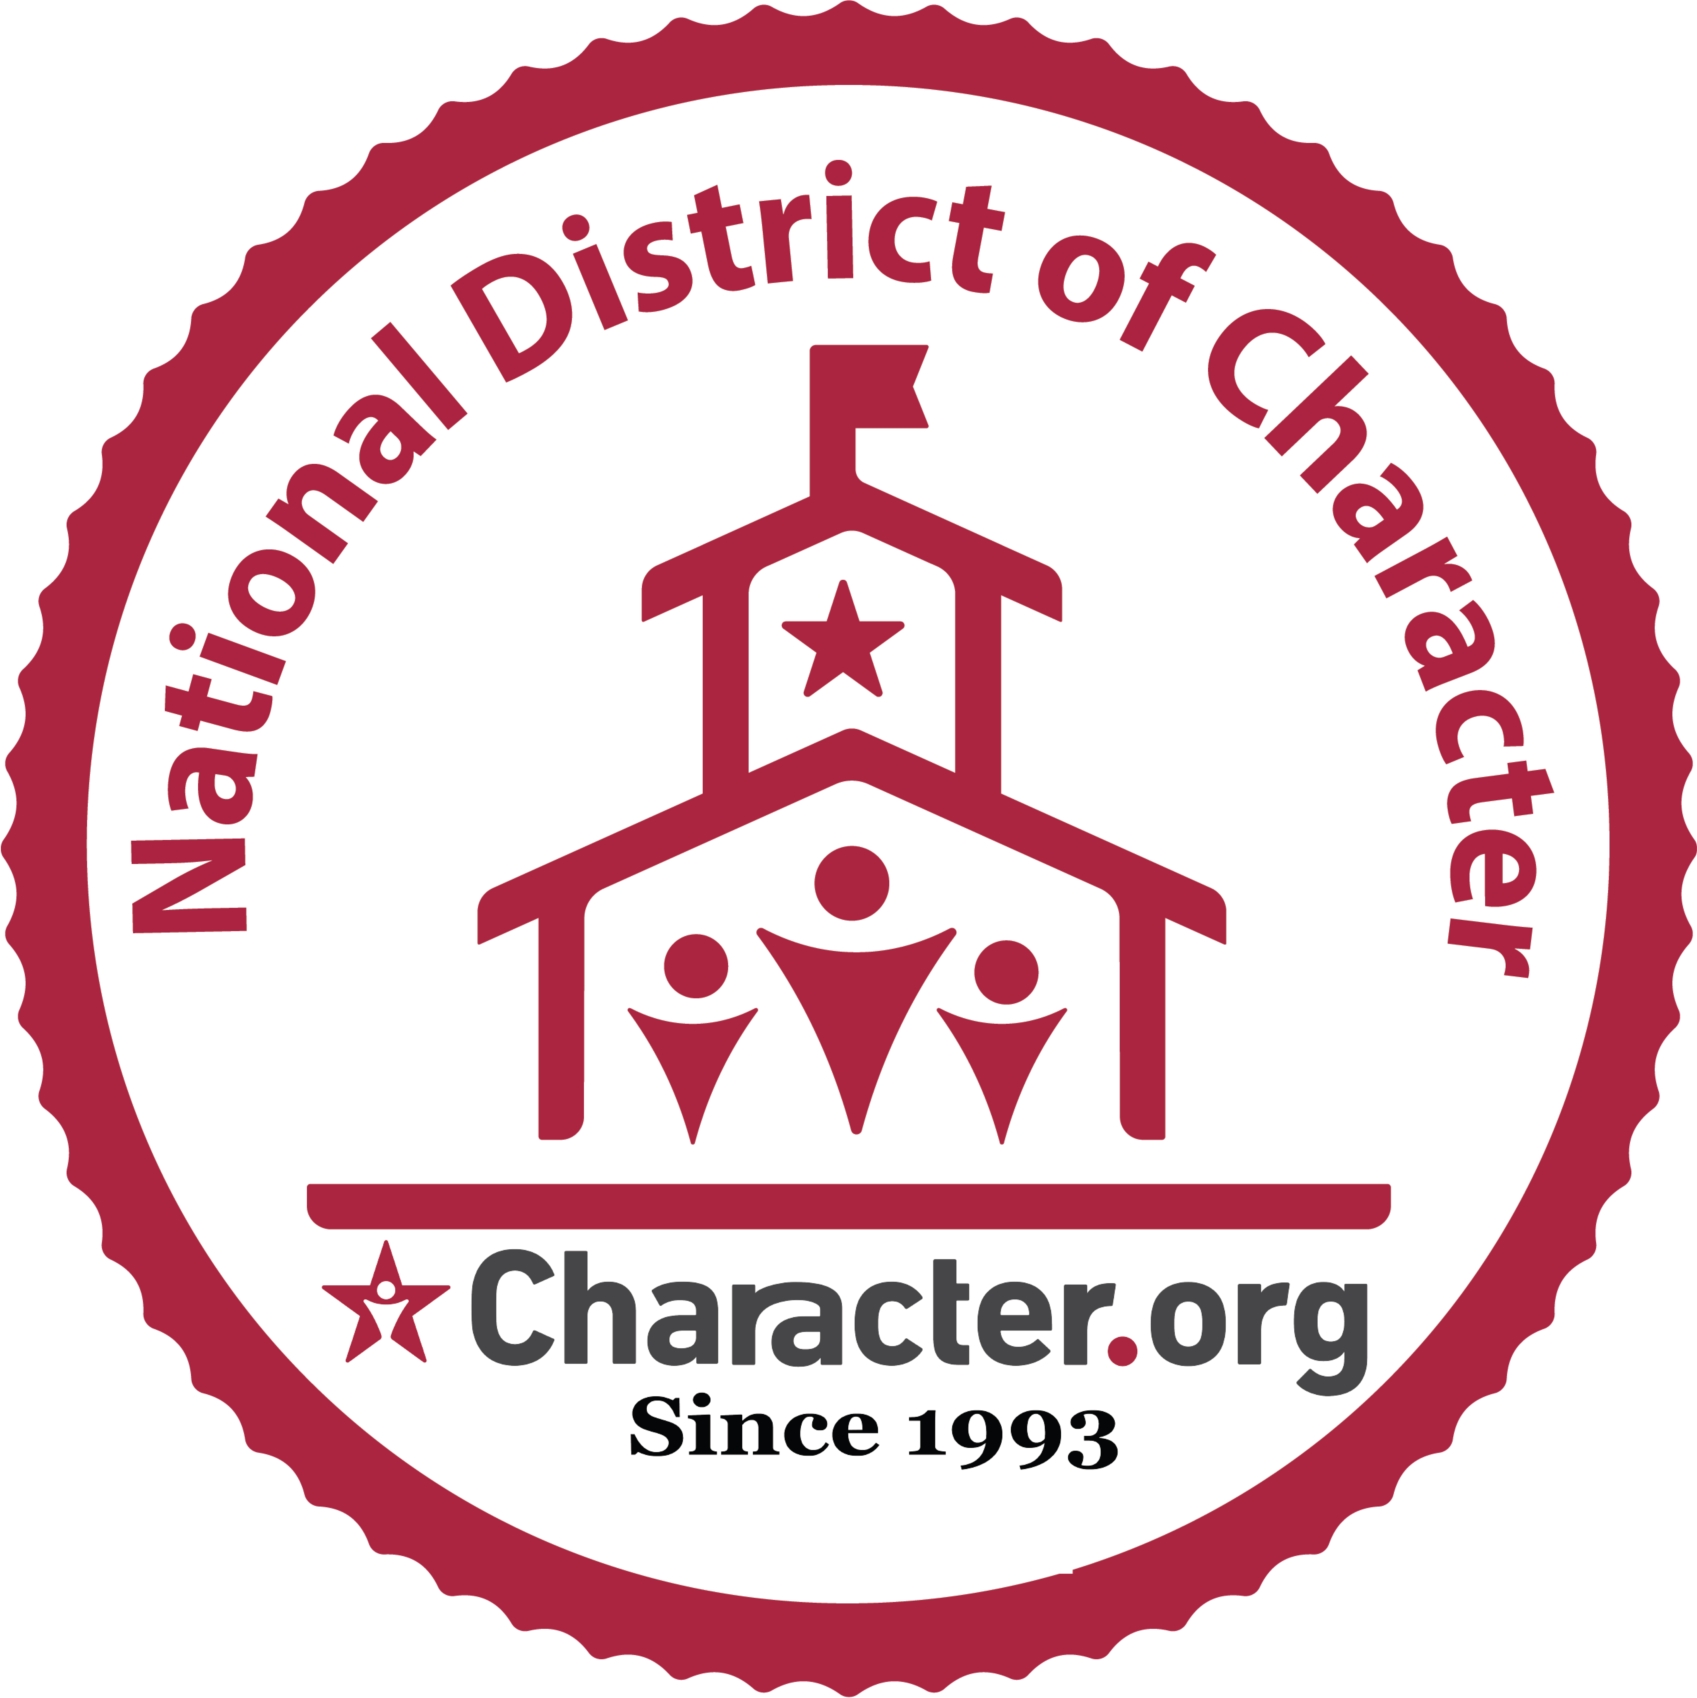 On May 10, 2019, the Ladue School District was named a National District of Character and two of its schools — the Ladue Early Childhood Center and Ladue Middle School — were named as National Schools of Character. 